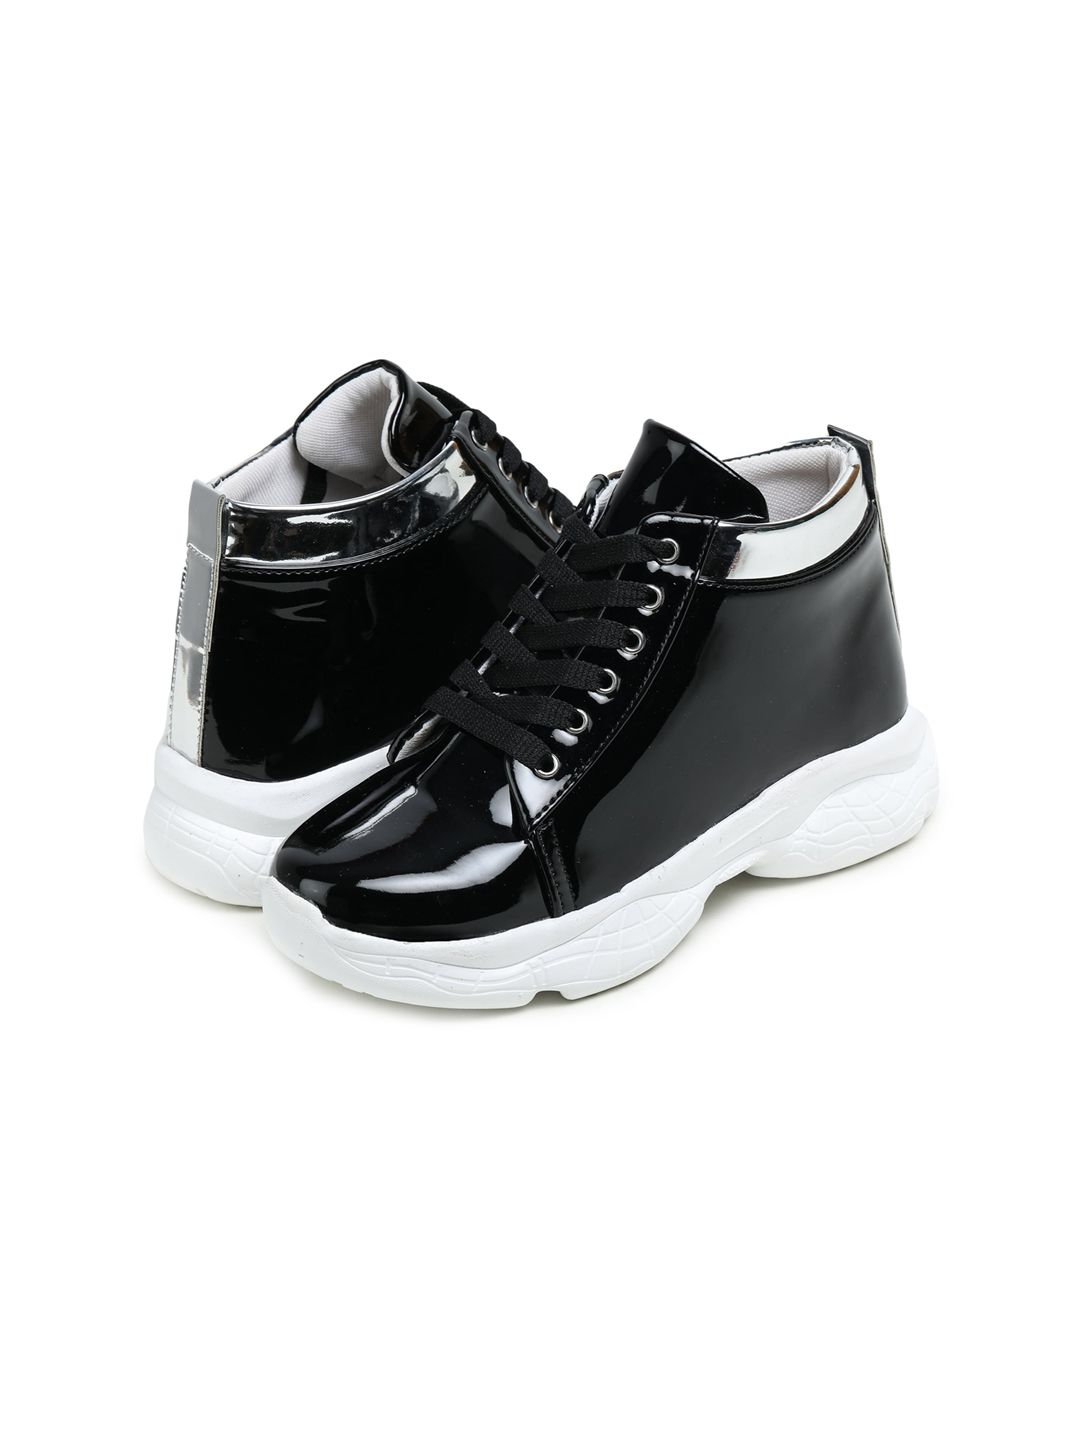 BOOTCO Women Black High-Top Casual Sneakers Price in India